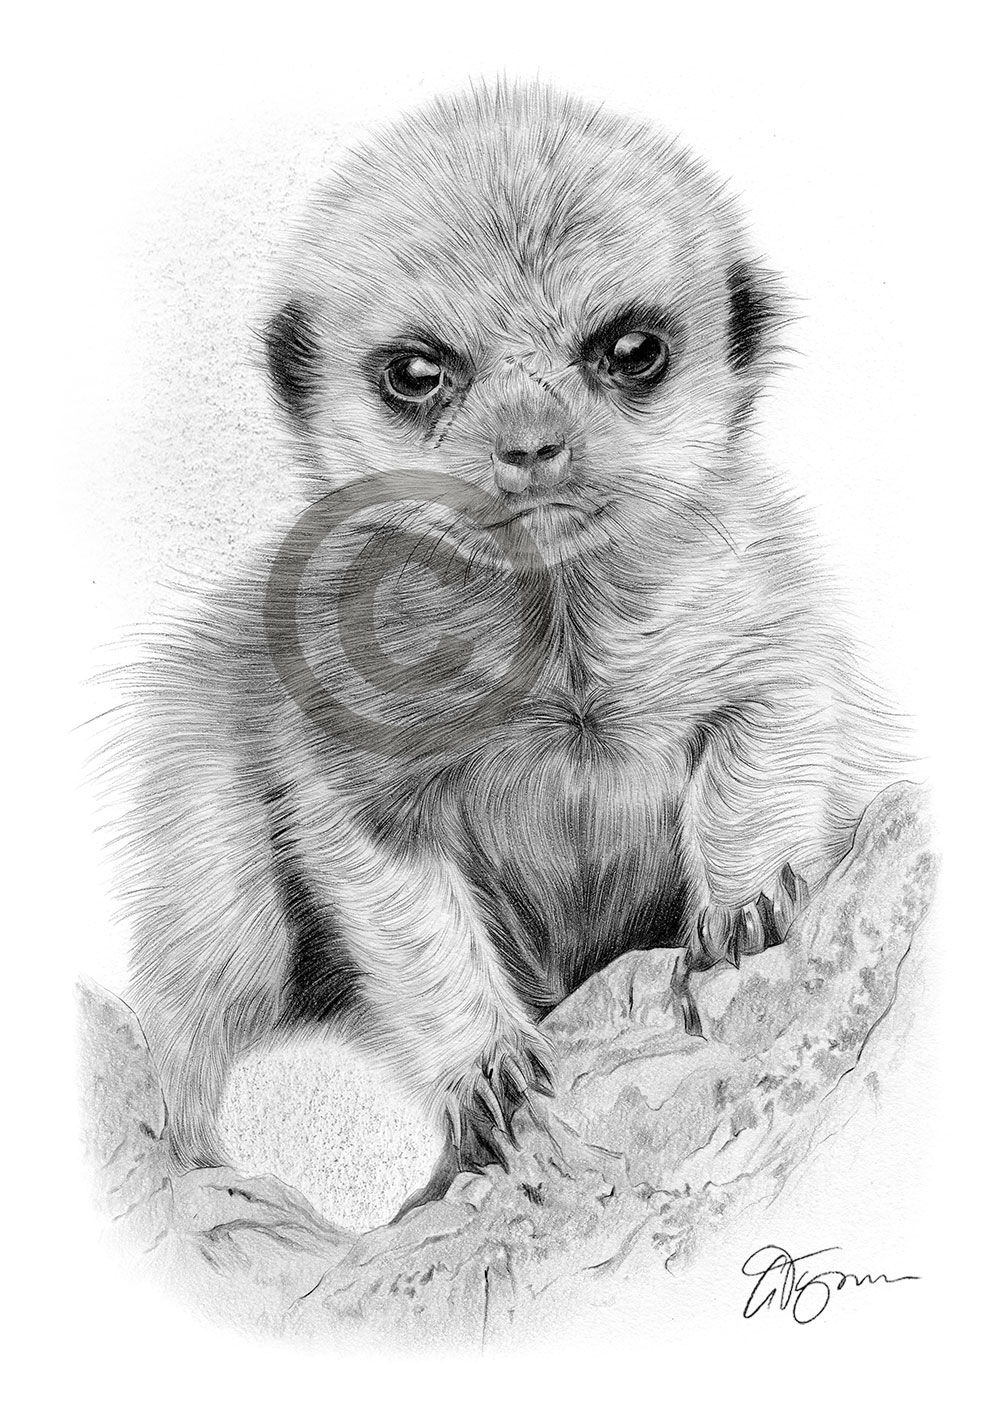 Pencil drawing of a baby meerkat by artist Gary Tymon